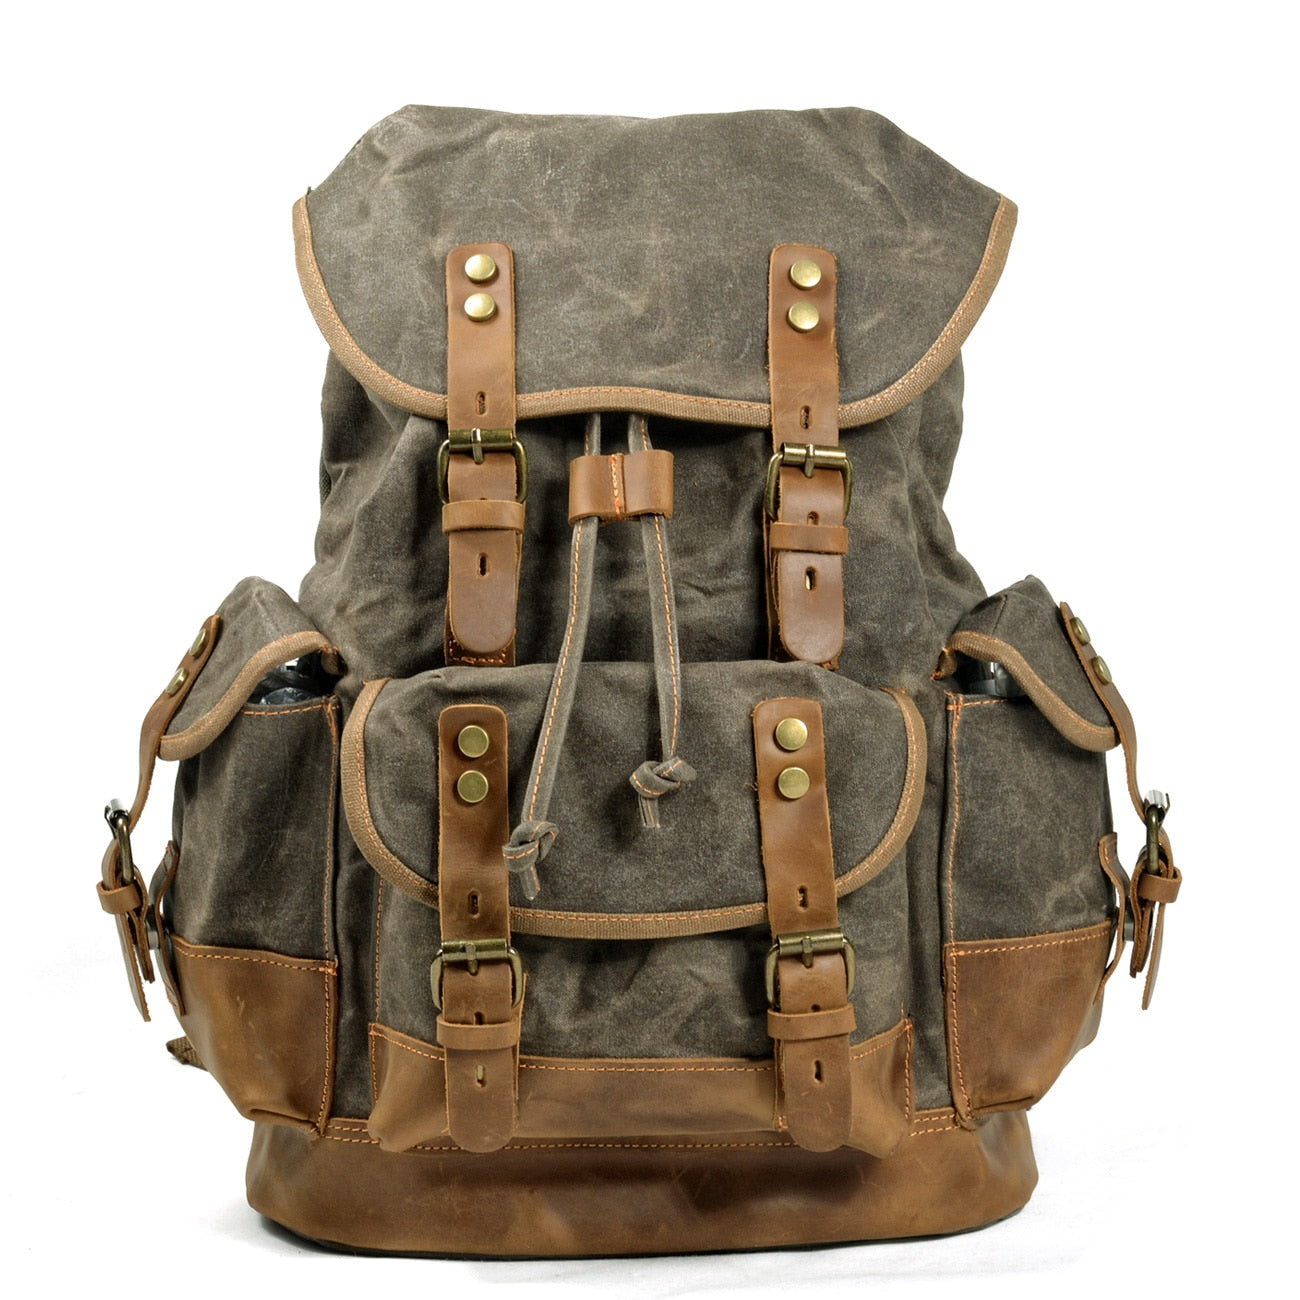 Vintage Backpack from Canvas & Cowhide for Hiking Camping - Army Green 2 Available at 2Fast2See.co